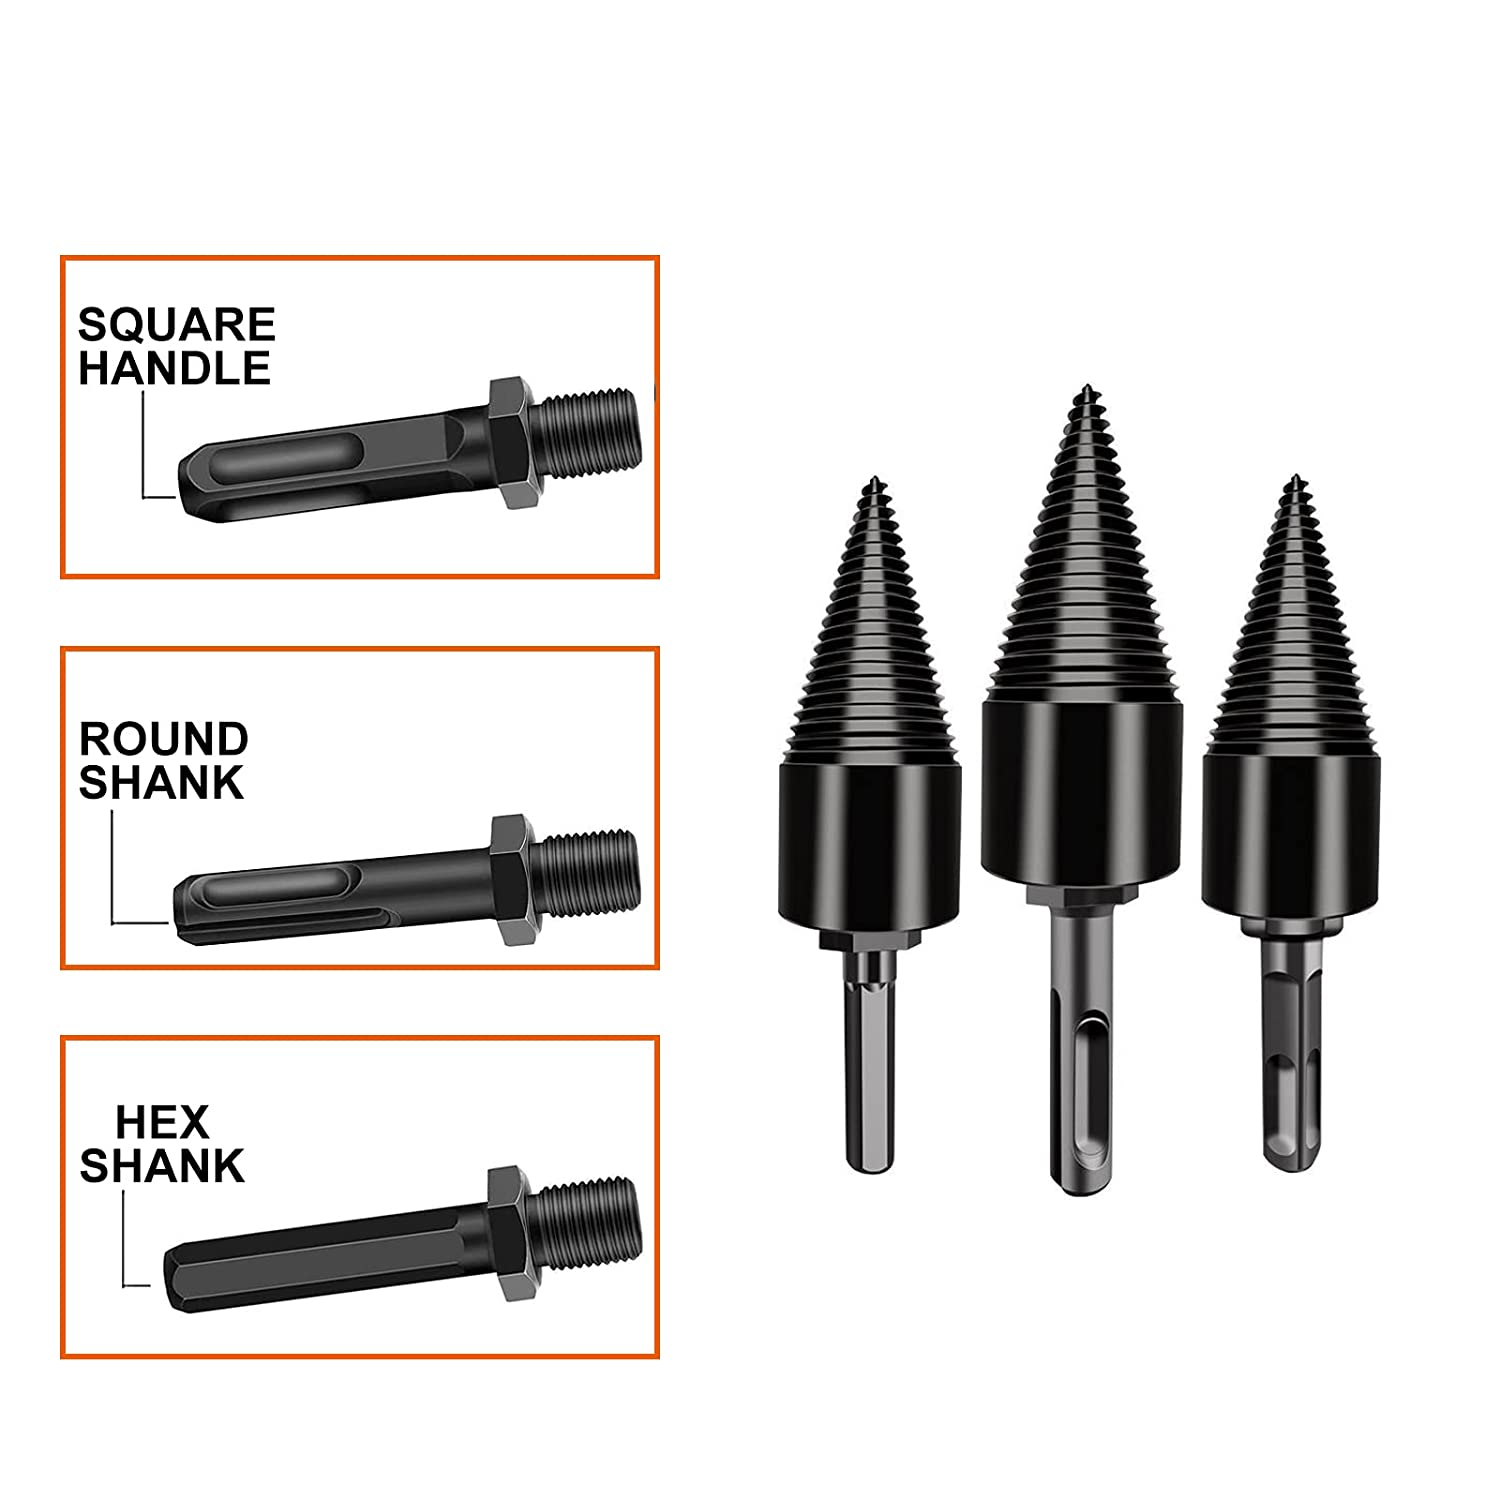 Fridja 3pcs Removable Firewood Log Splitter Drill Bit, Wood Splitter Drill Bits,Heavy Duty Drill Screw Cone Driver for Hand Drill Stick-hex+Square+Round (32mm) - image 3 of 7